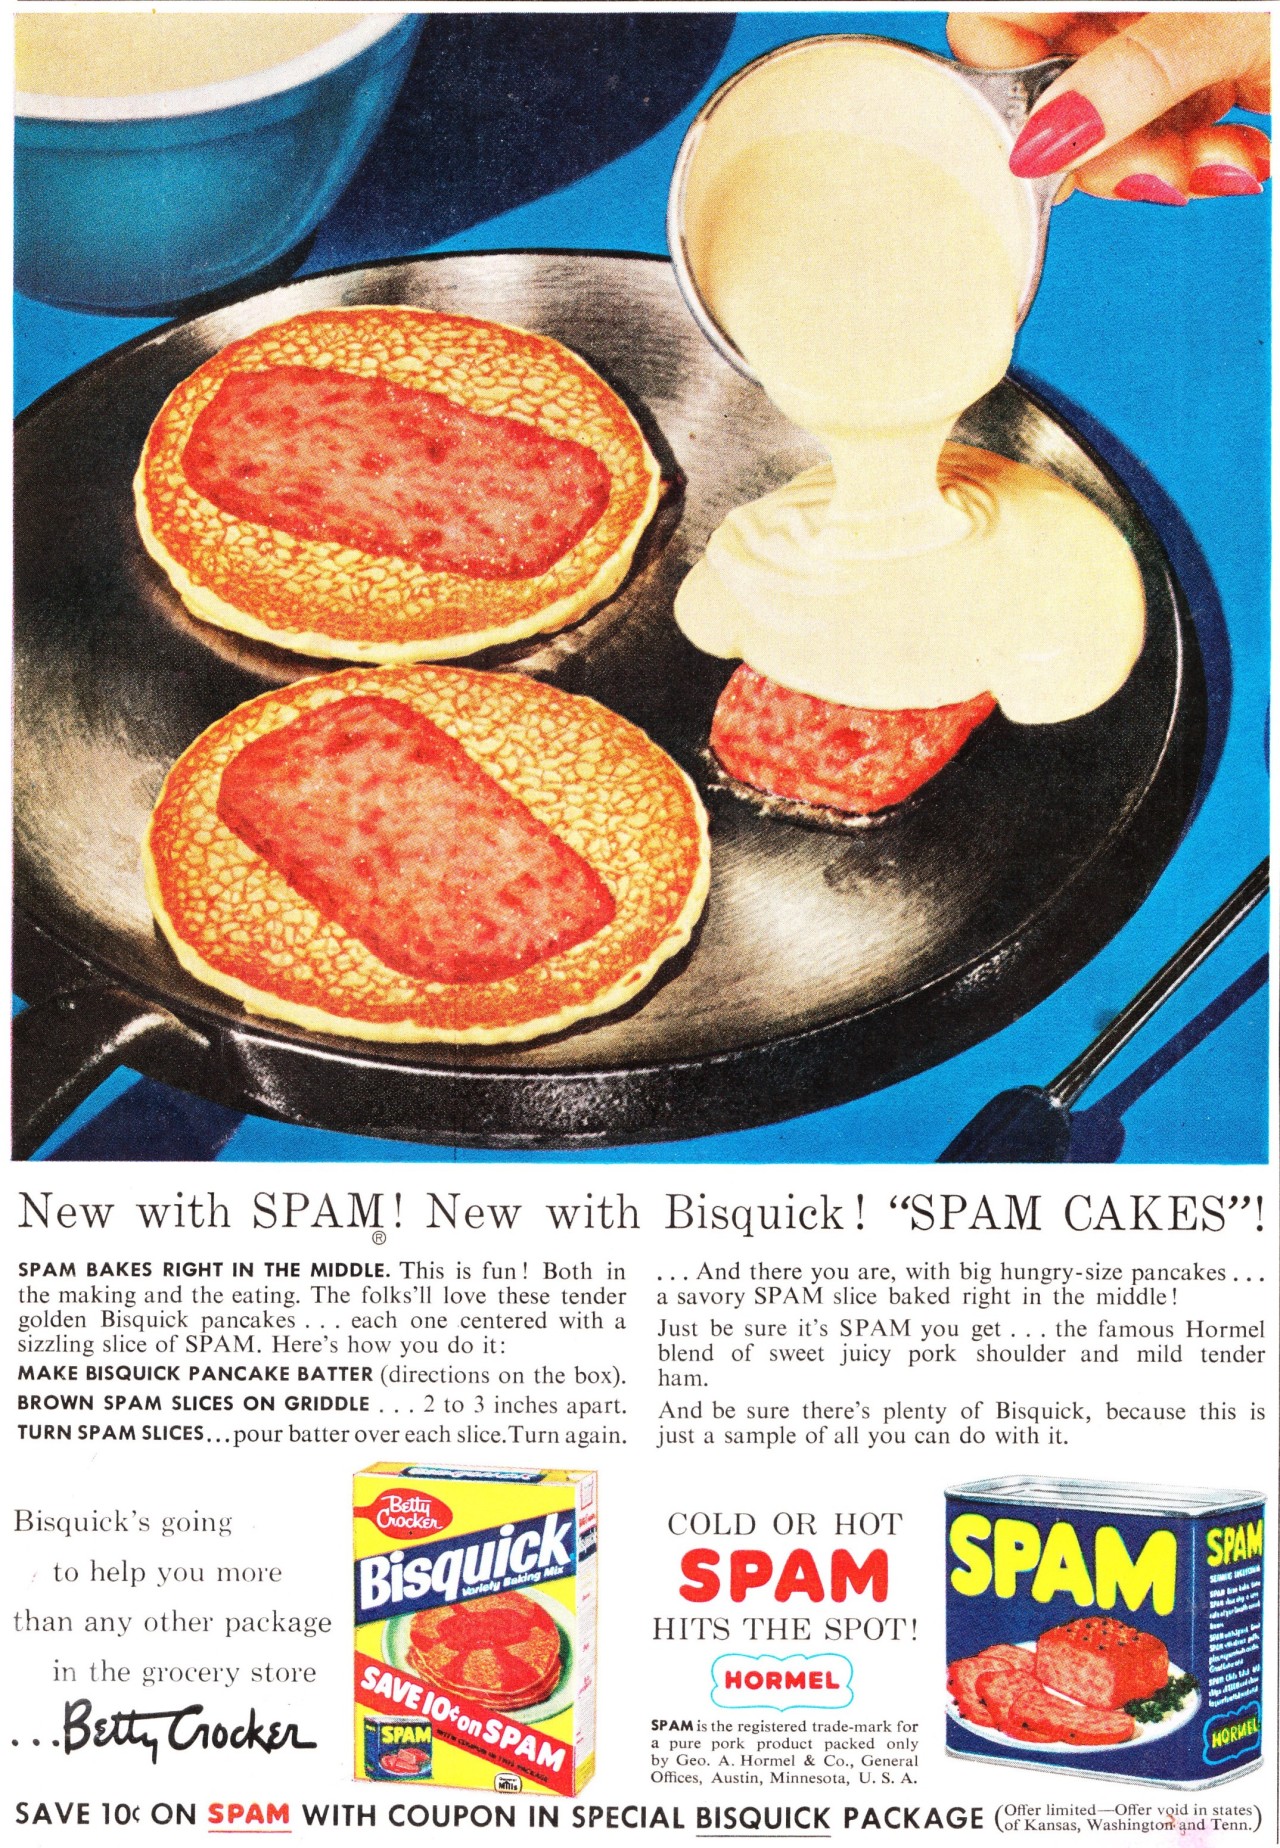 Bisquick and Spam - 1950s